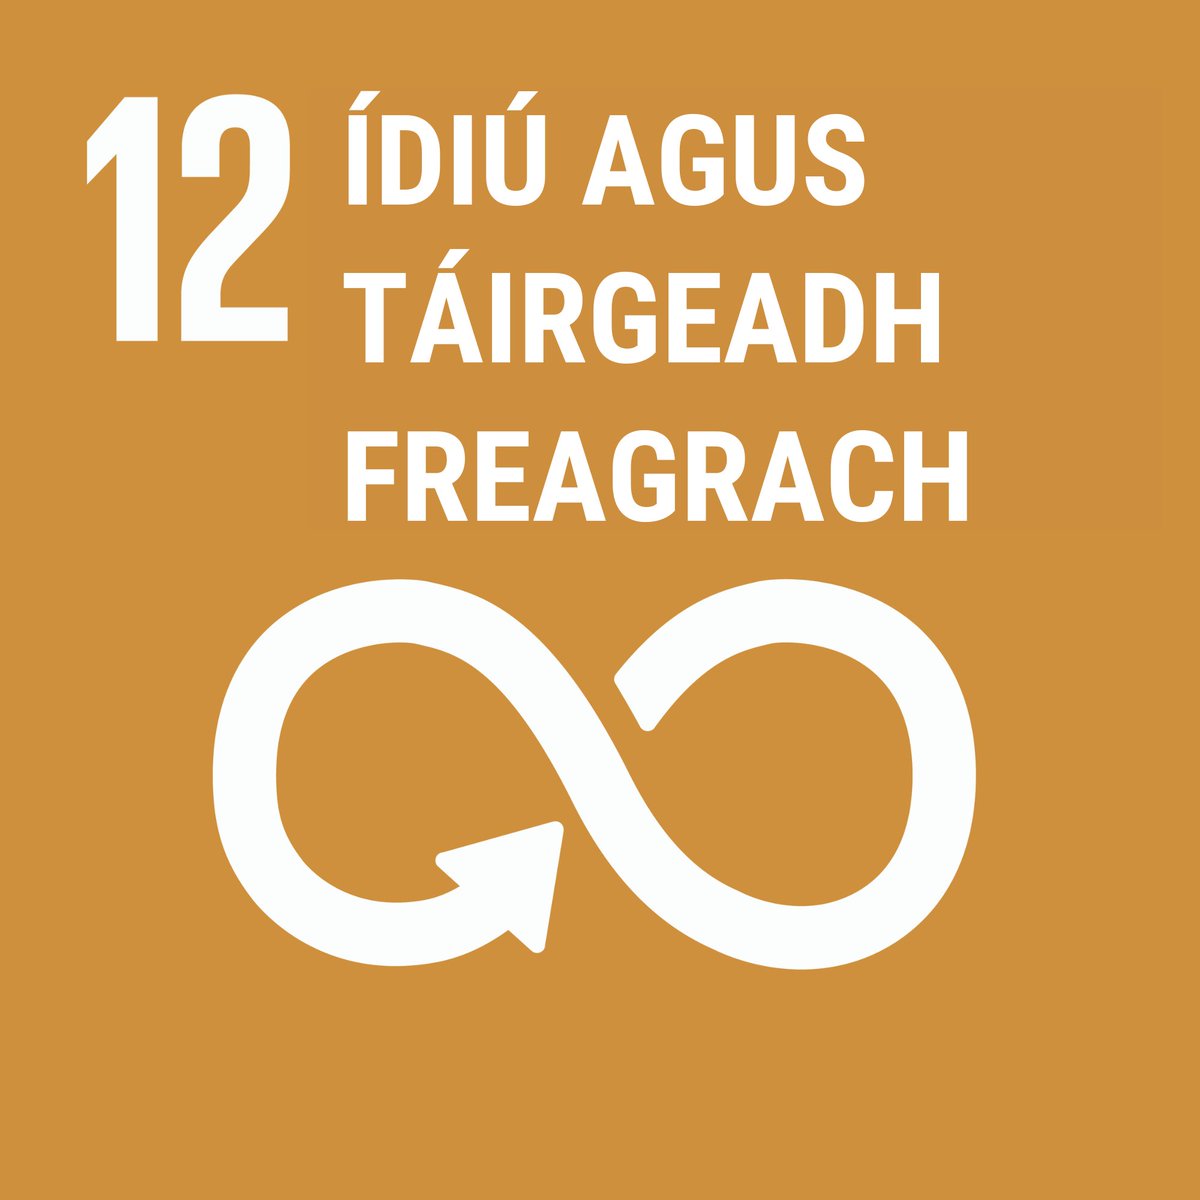 #SDG12 Ensure sustainable consumption and production patterns. Learn about SDG 12 in @Oide_PP_Tech4 #engingeering @oide_Ireland LO 3.5 @Education_Ire @Dept_ECC @OECDEduSkills @Education_Ire  #SDGsIrl #take1mayday #take1programme